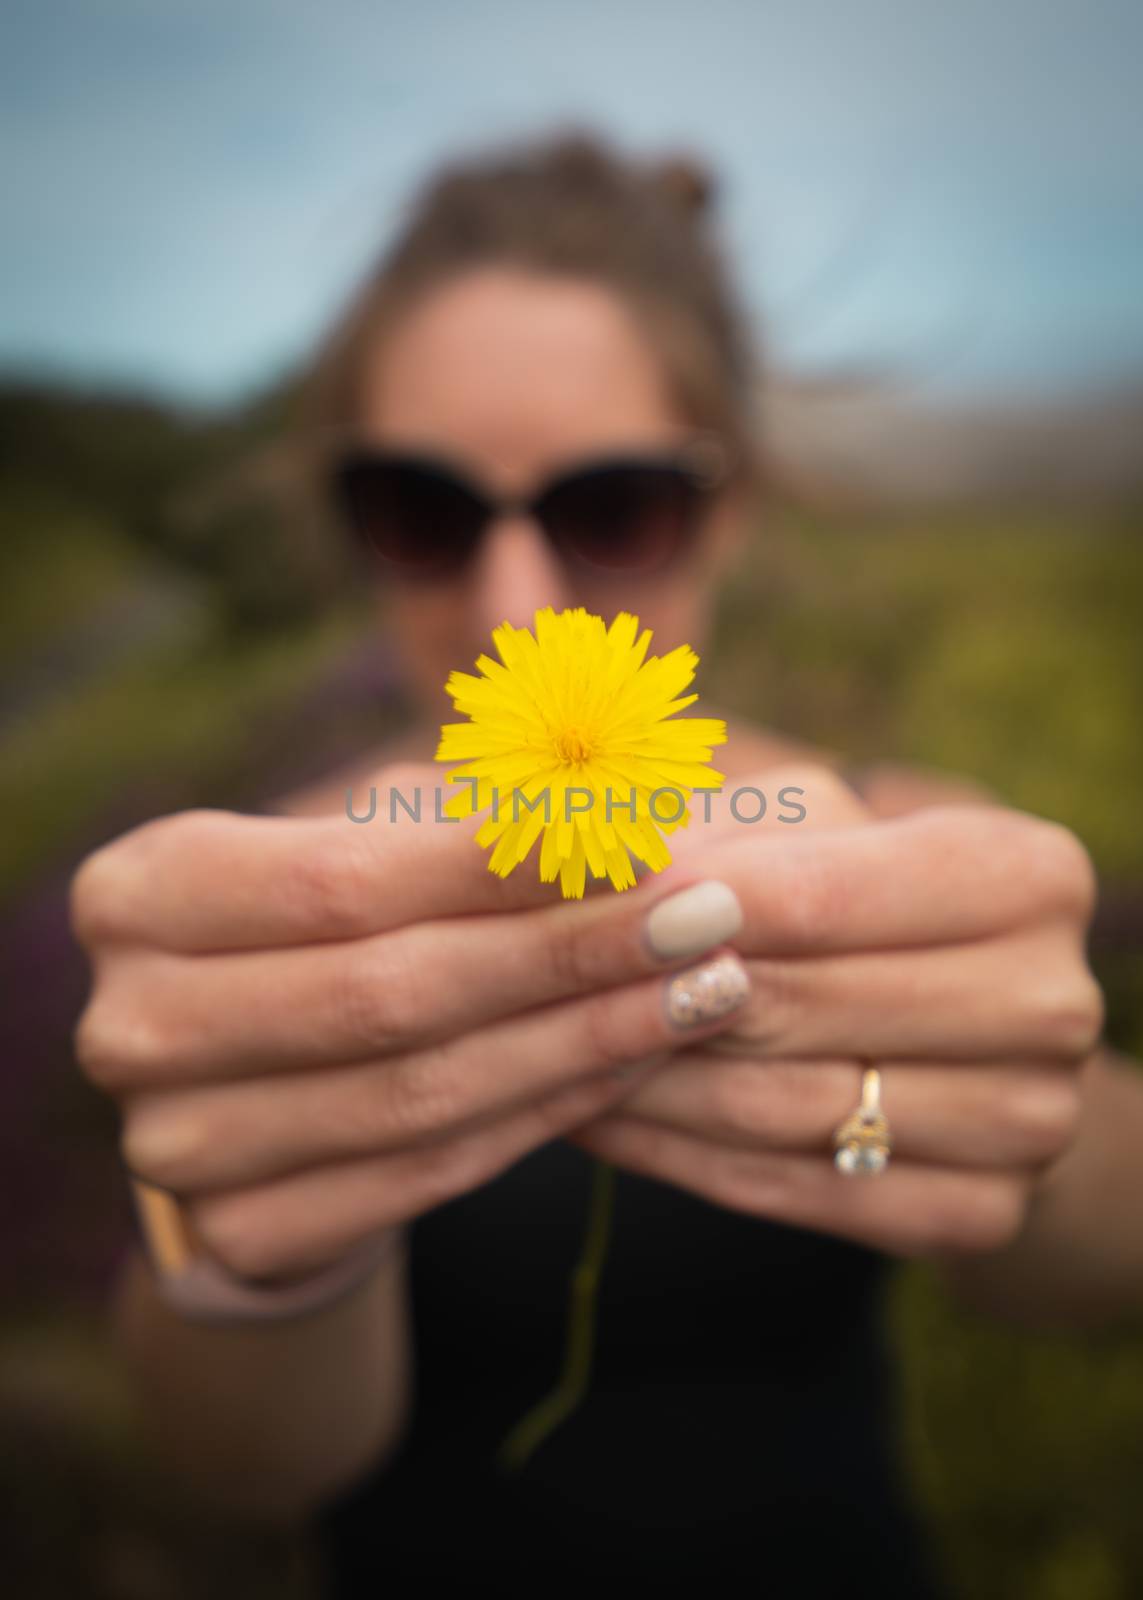 A portrait of a woman holding a yellow dandelion flower close up